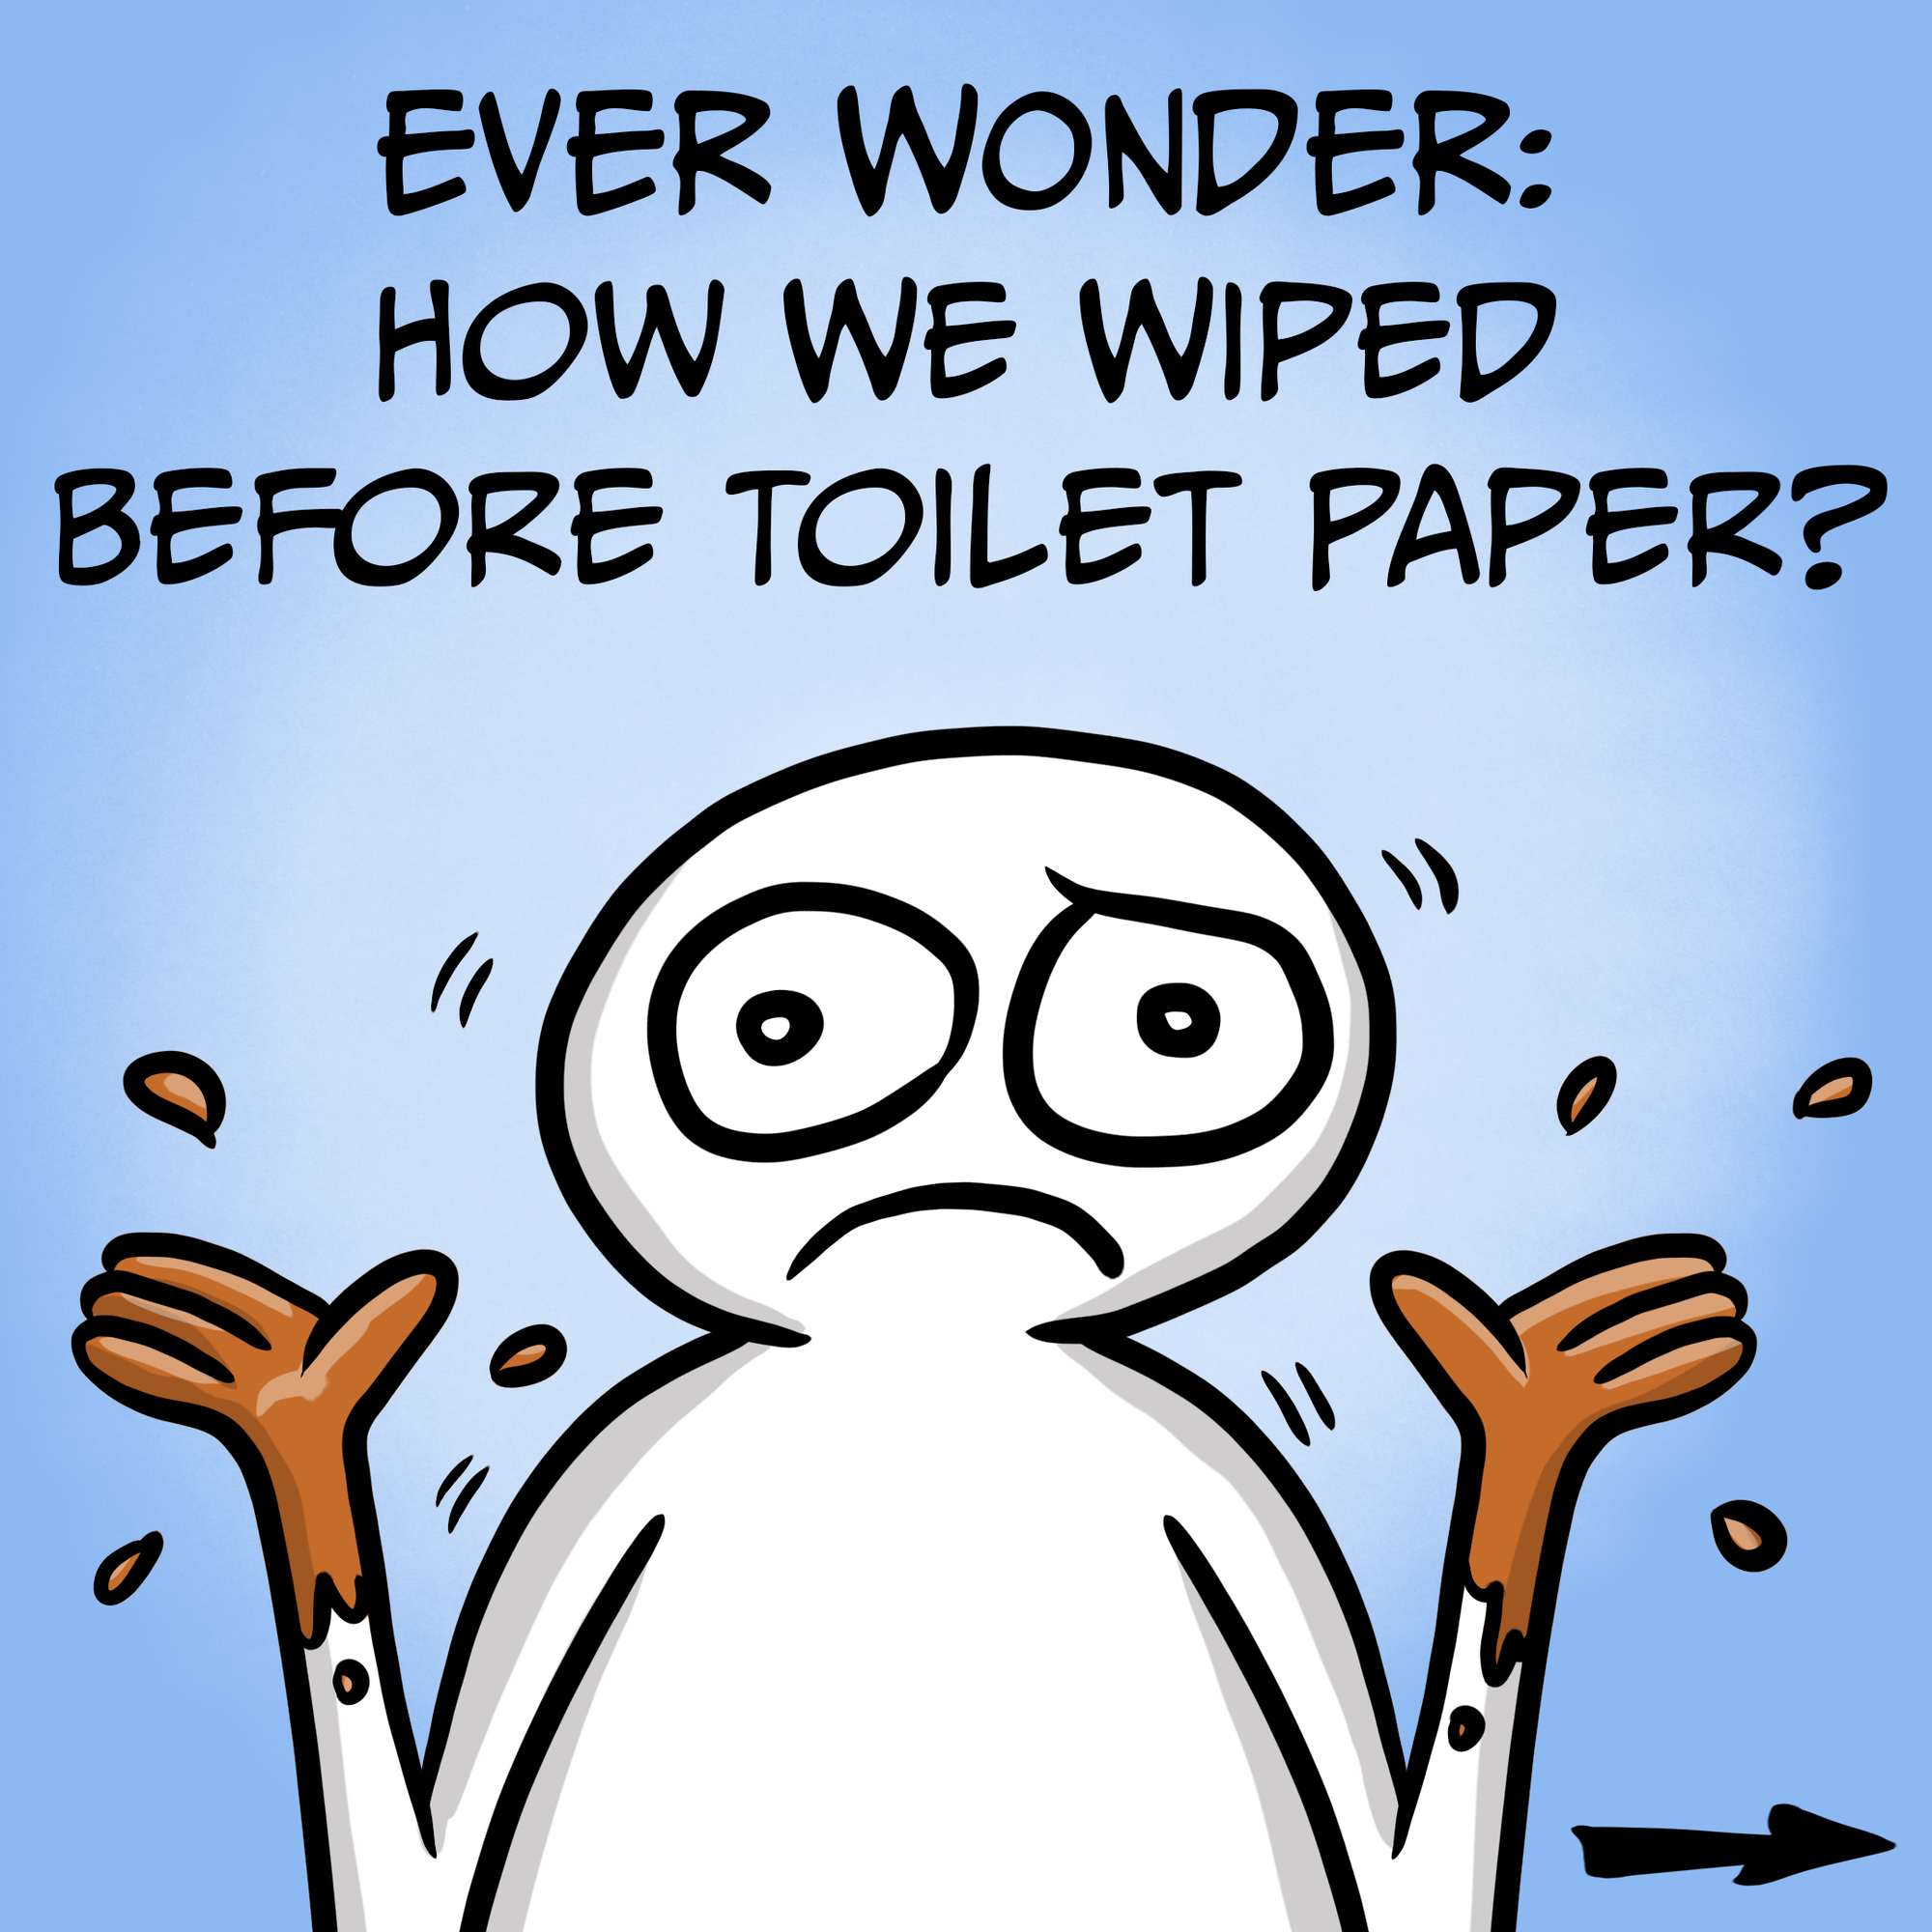 Ever Wonder? What We Wiped With Before Toilet Paper?